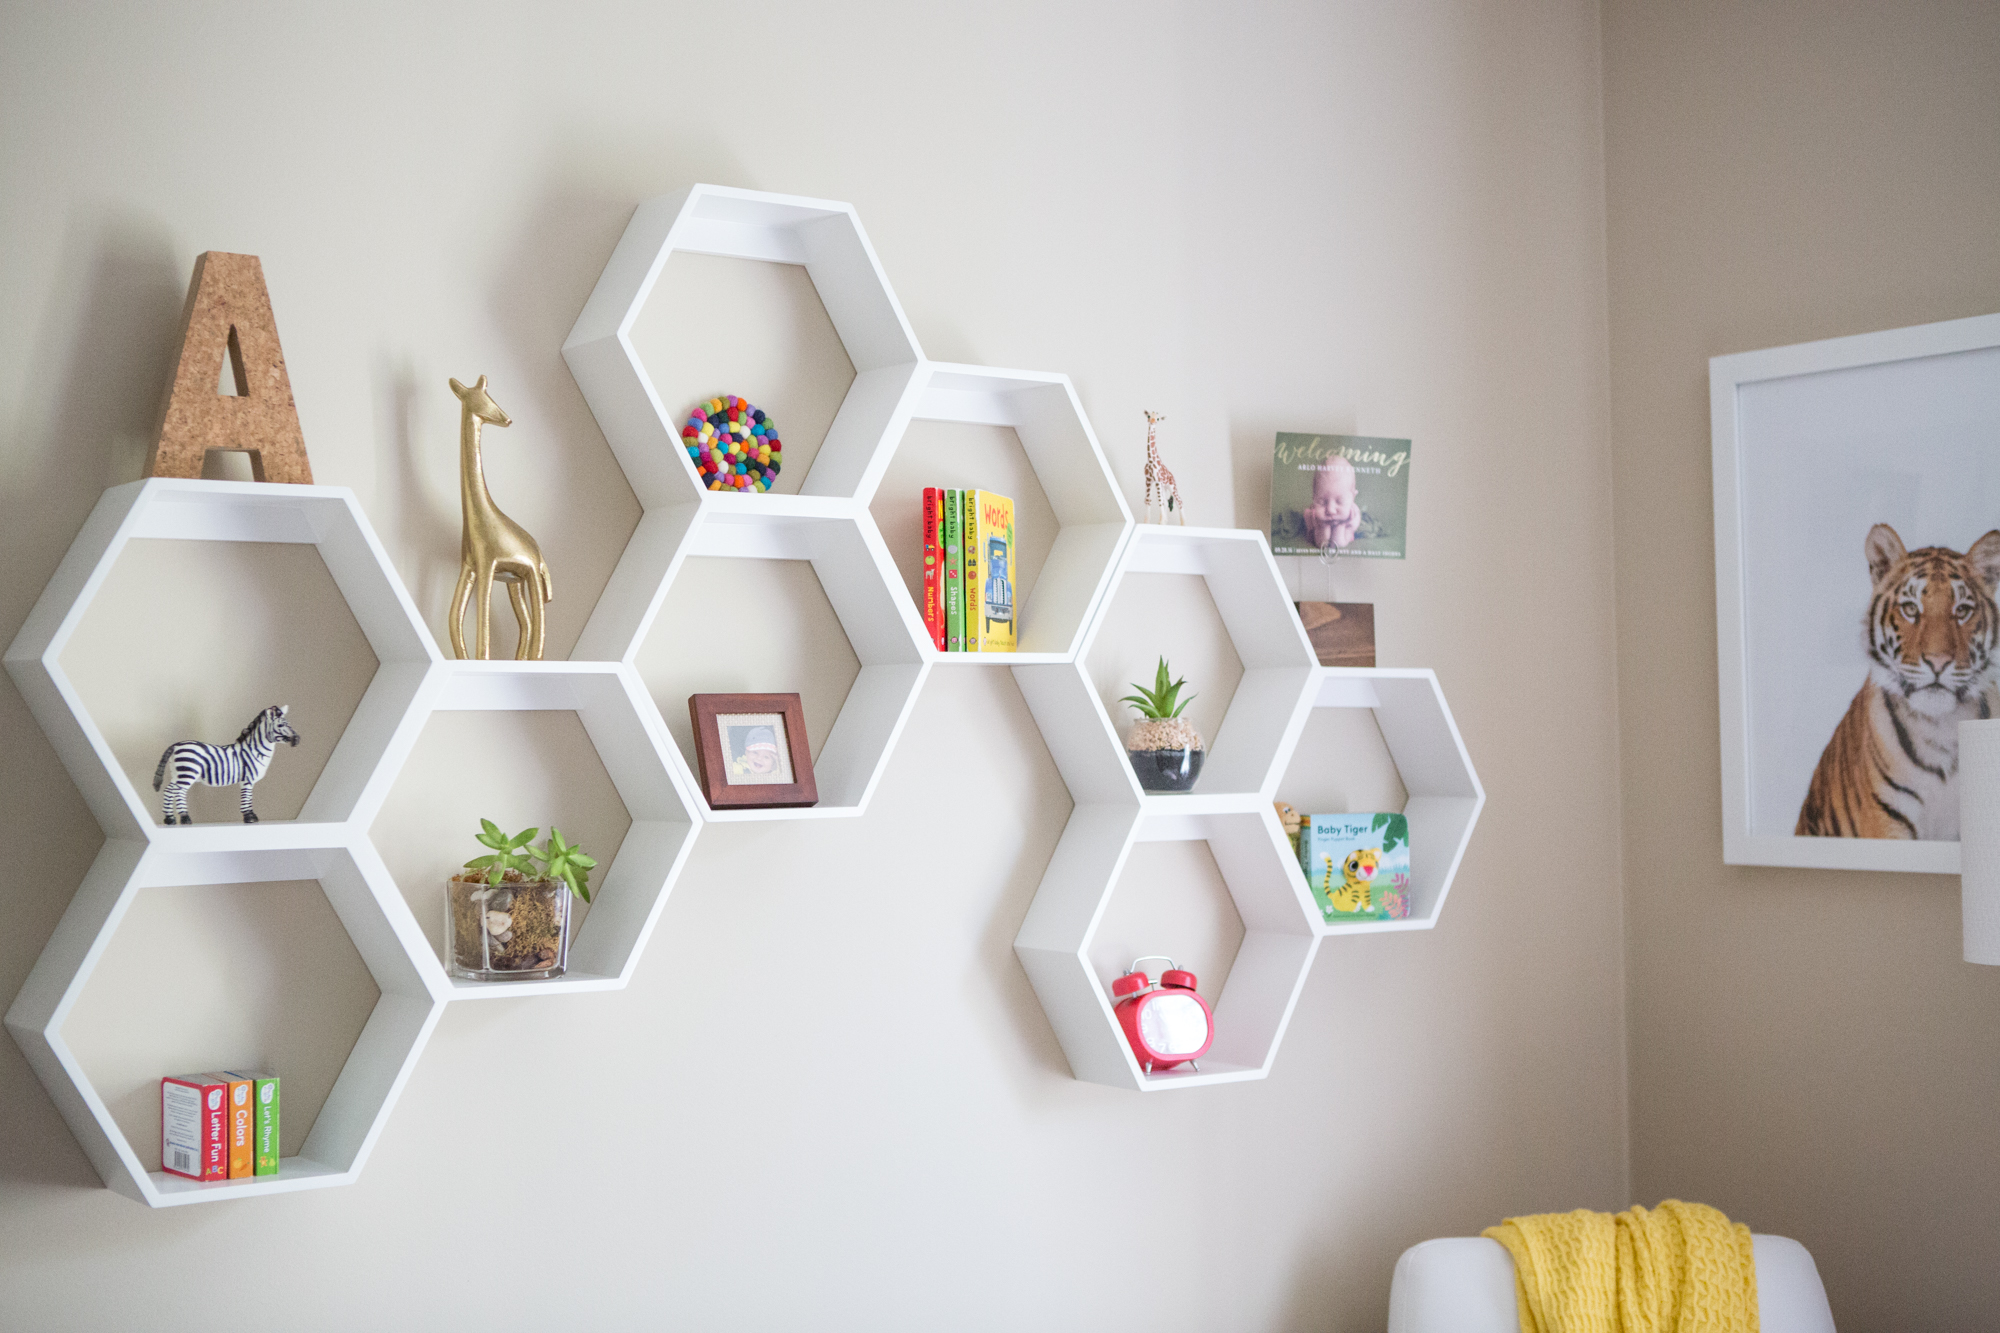 White honeycomb shelving displaying objects in kids' room.